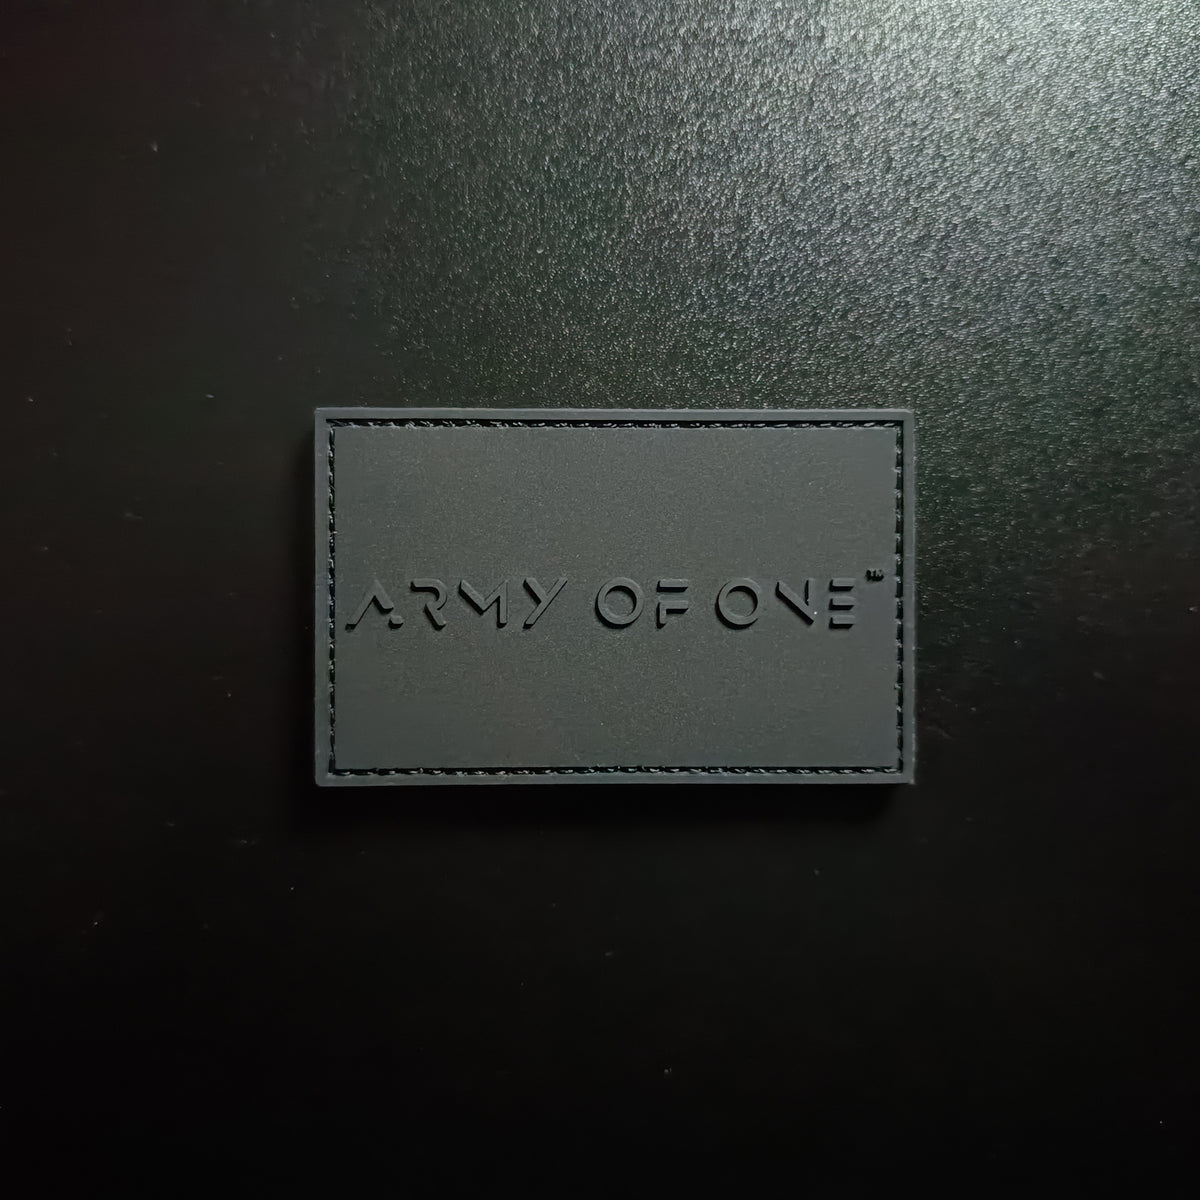 ARMY OF ONE BLACK PATCH